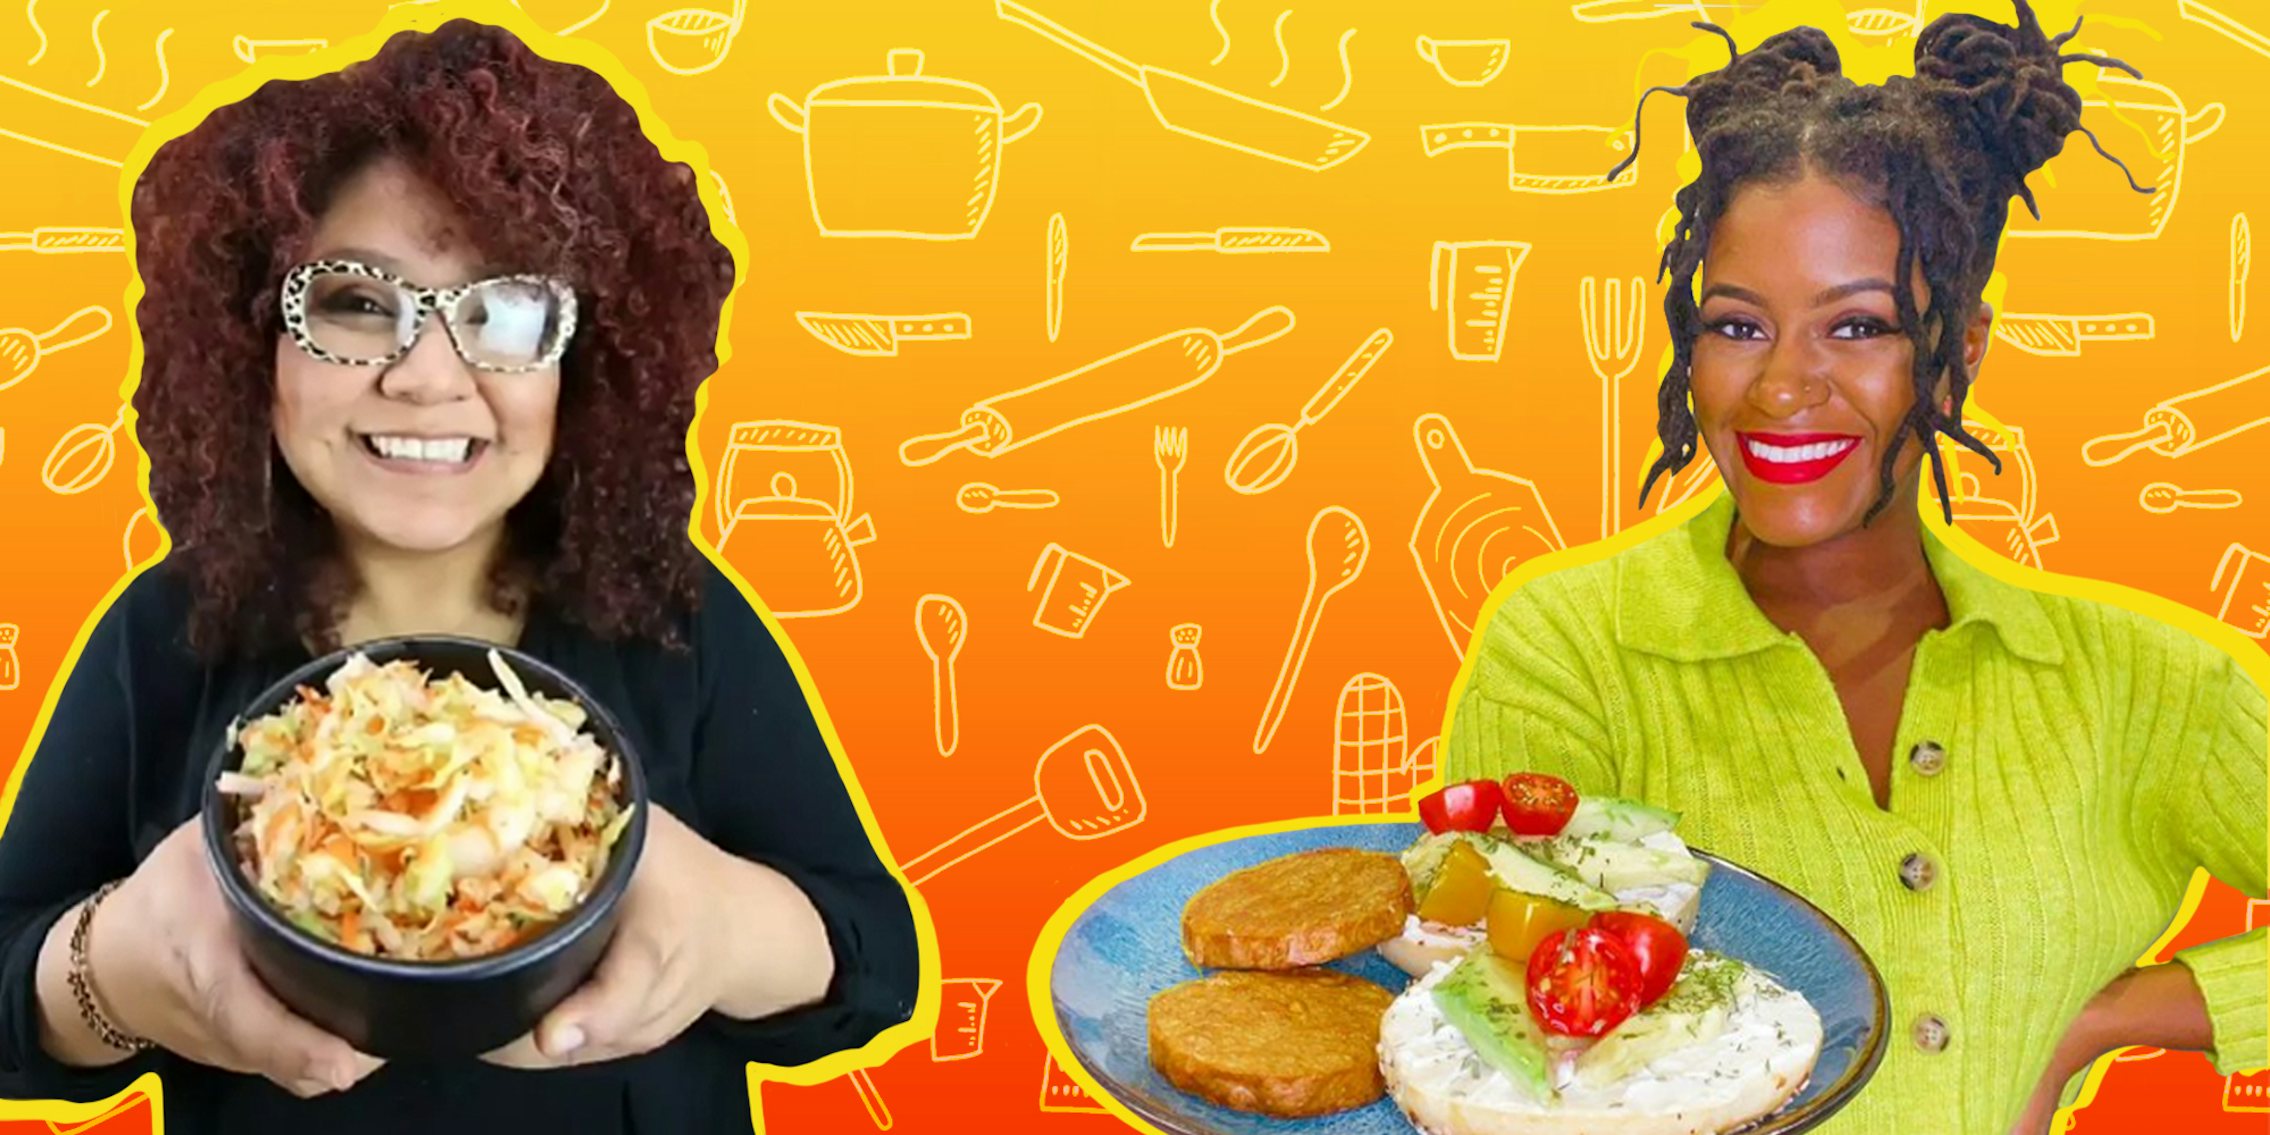 The Salvi Vegan posing with bowl of food with DiaryOfAMadVegan also posing with food in hand in front of yellow to orange vertical gradient cooking background Passionfruit Remix